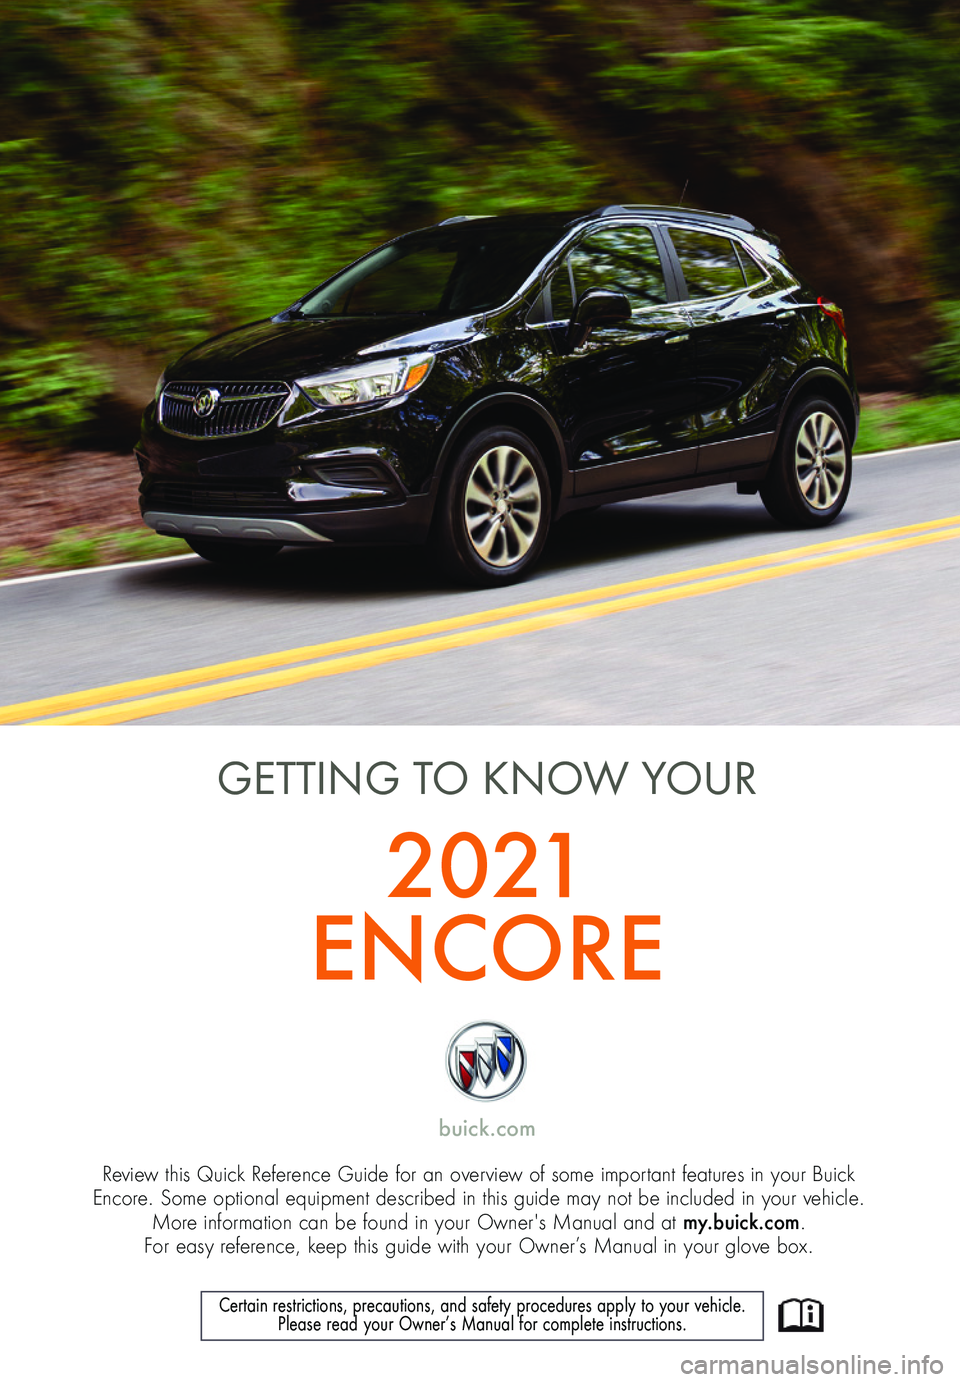 BUICK ENCORE GX 2021  Get To Know Guide 1
Review this Quick Reference Guide for an overview of some important features in your Buick  Encore. Some optional equipment described in this guide may not be included in your vehicle.  More informa